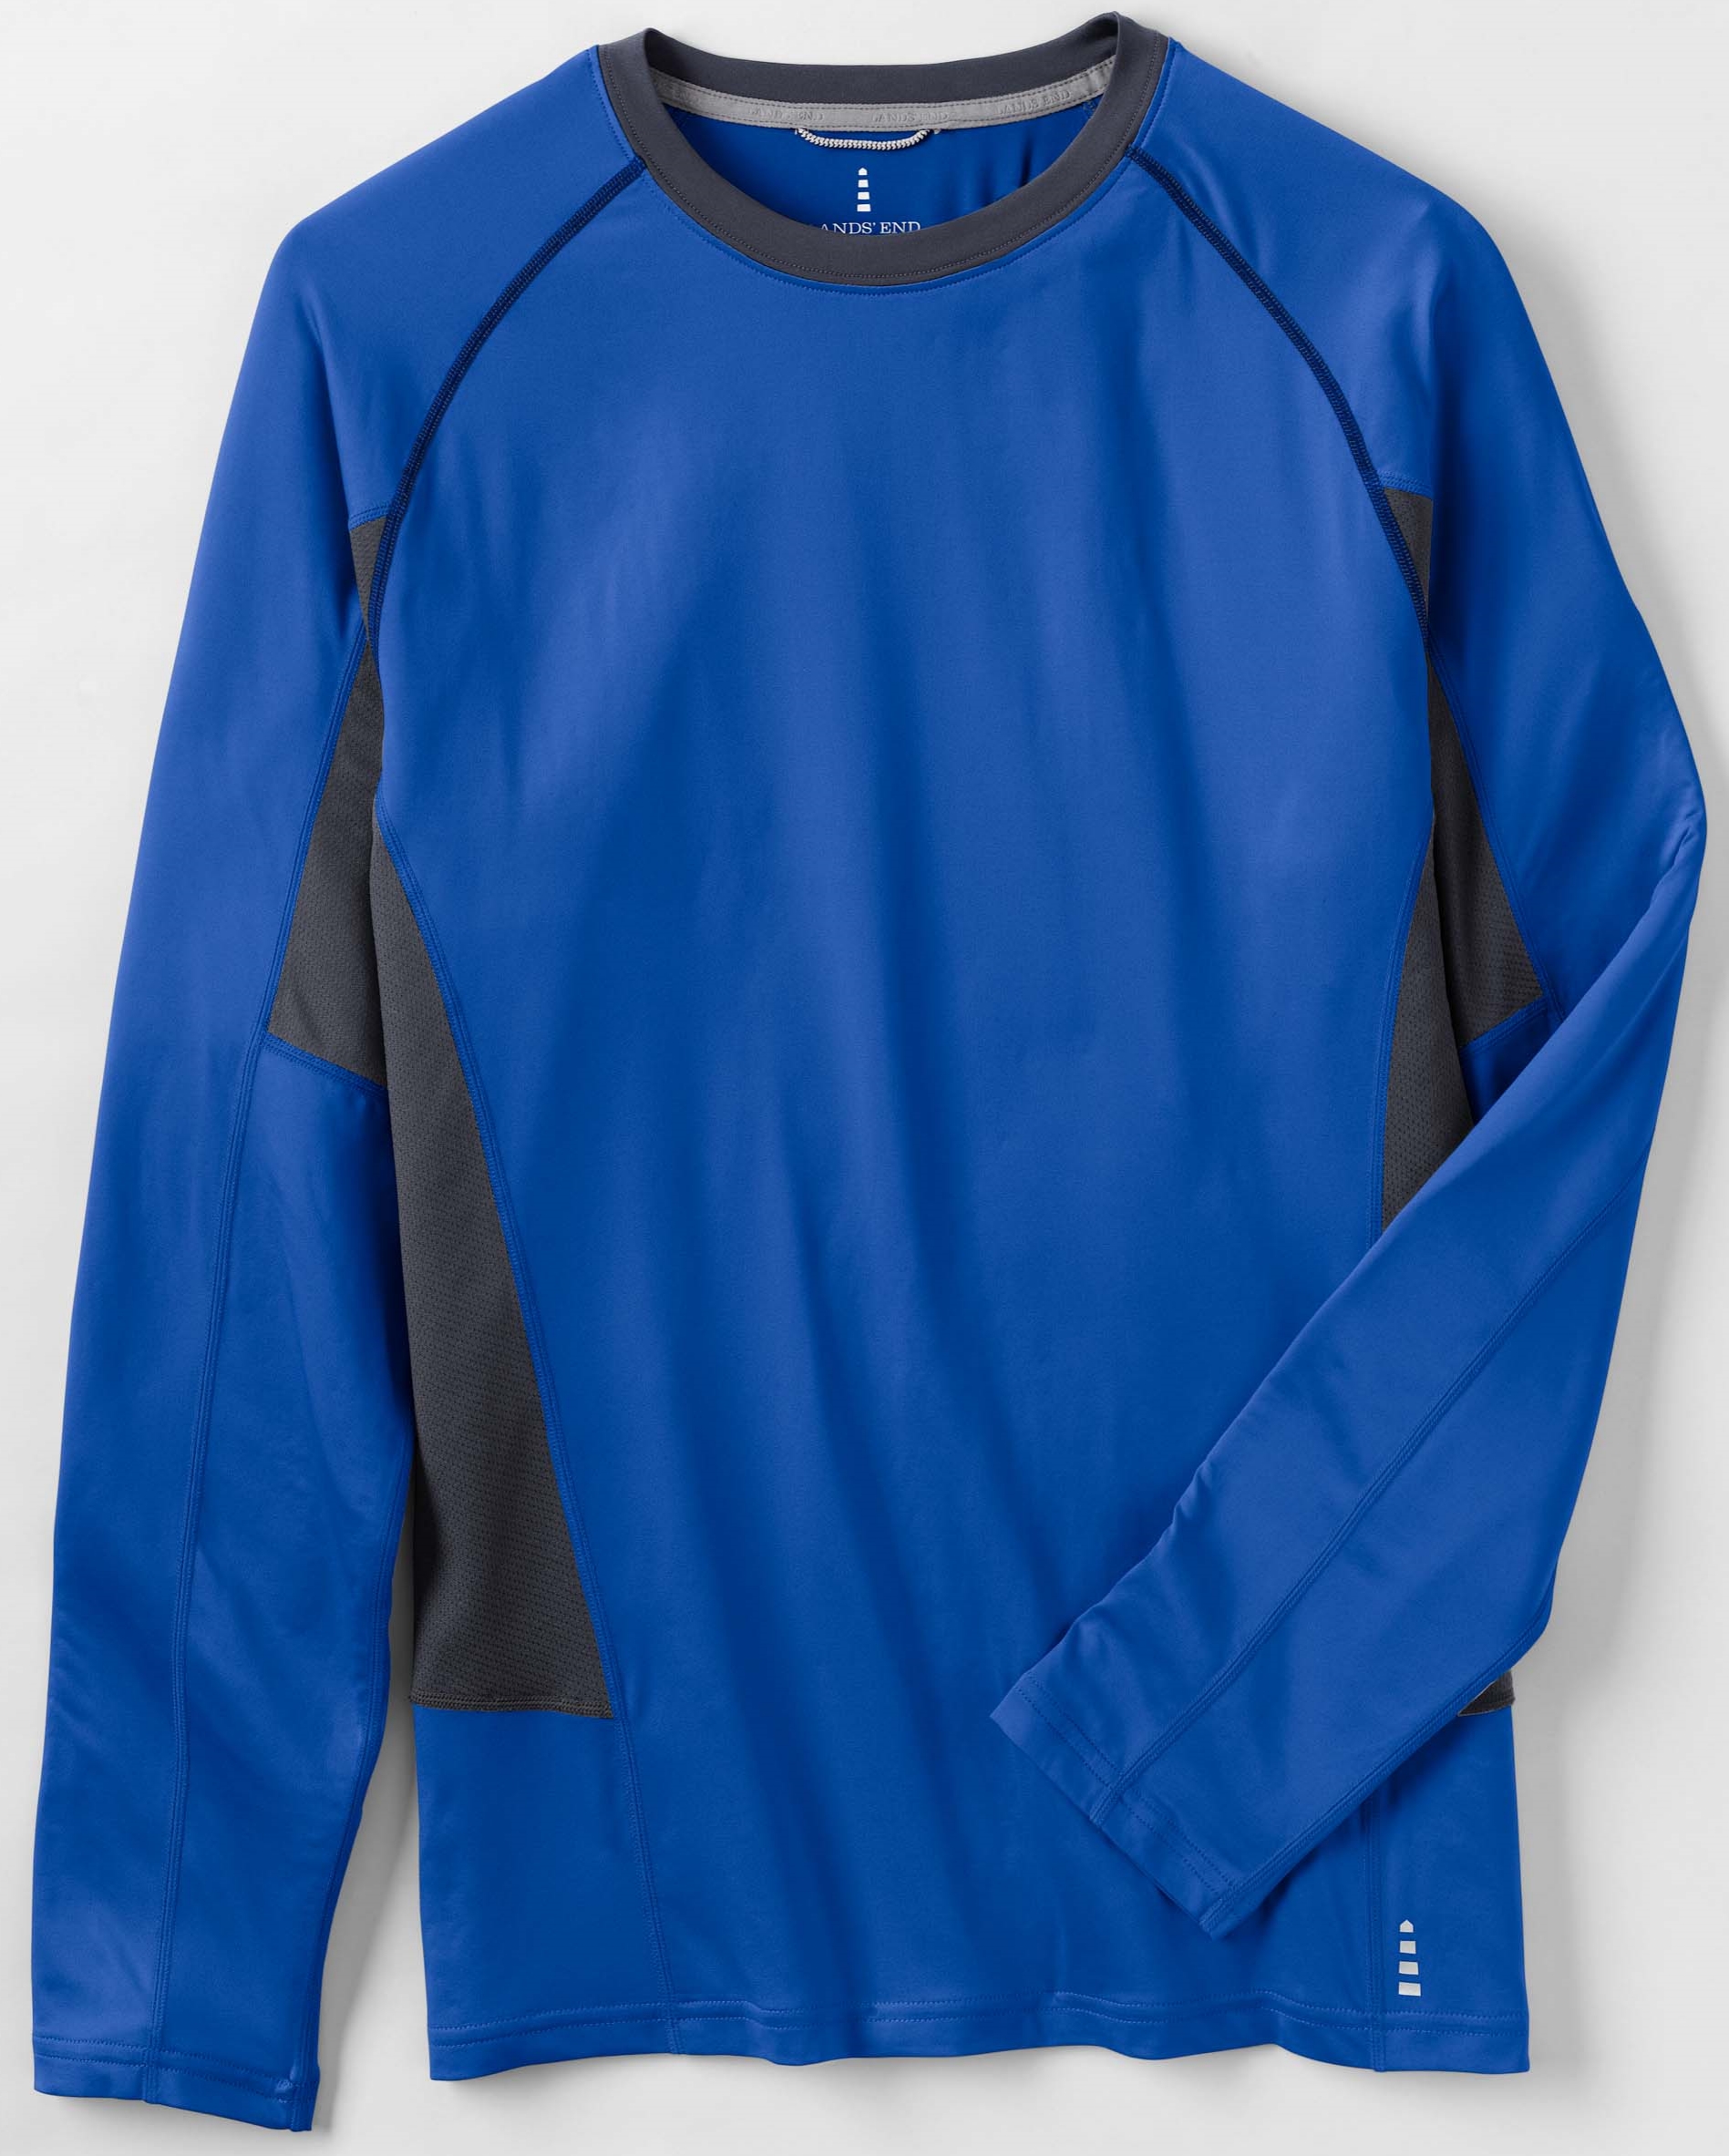 Lands' End Thermaskin Active Long Sleeve Crew, $44